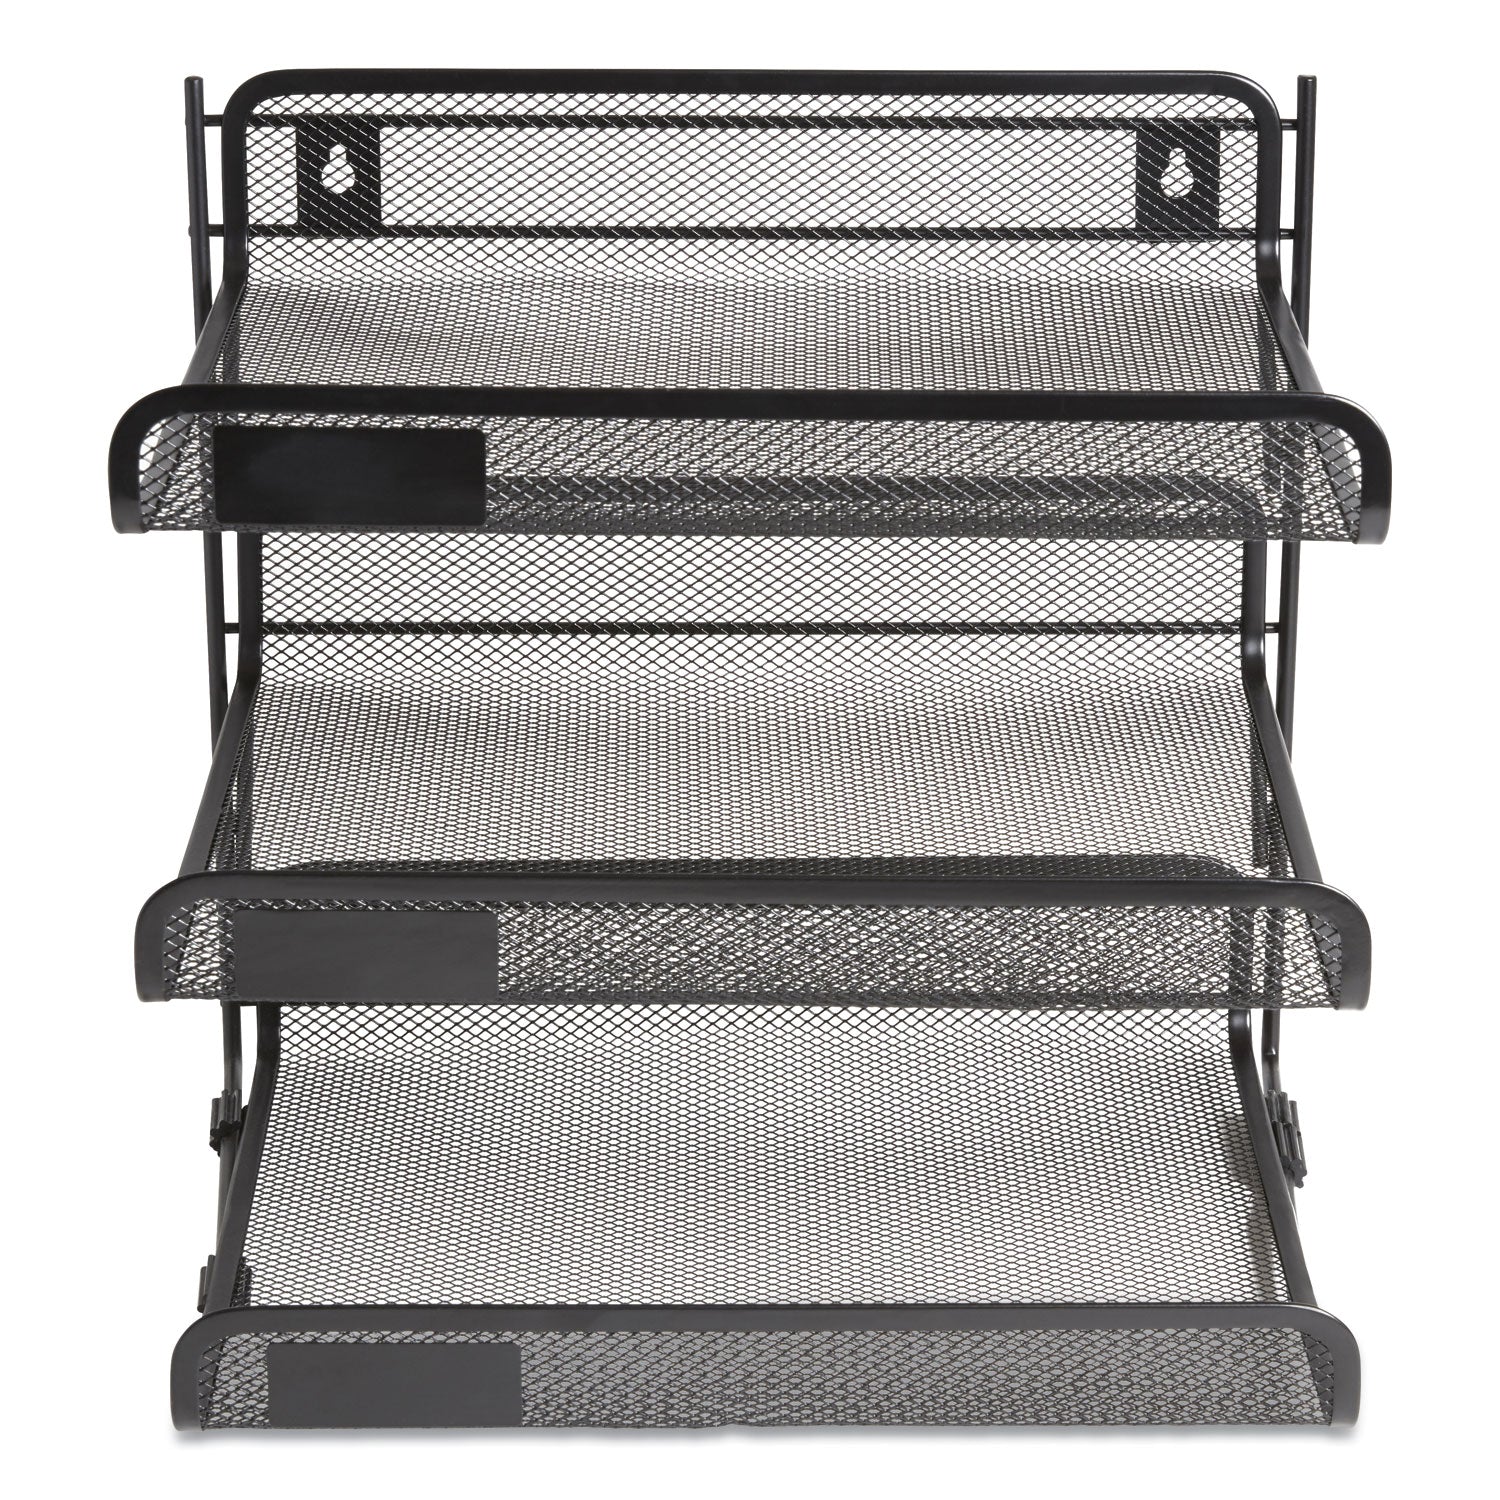 side-load-open-design-wire-mesh-horizontal-document-organizer-3-sections-letter-size-1378-x-1122-x-1338-matte-black_tud24402462 - 3